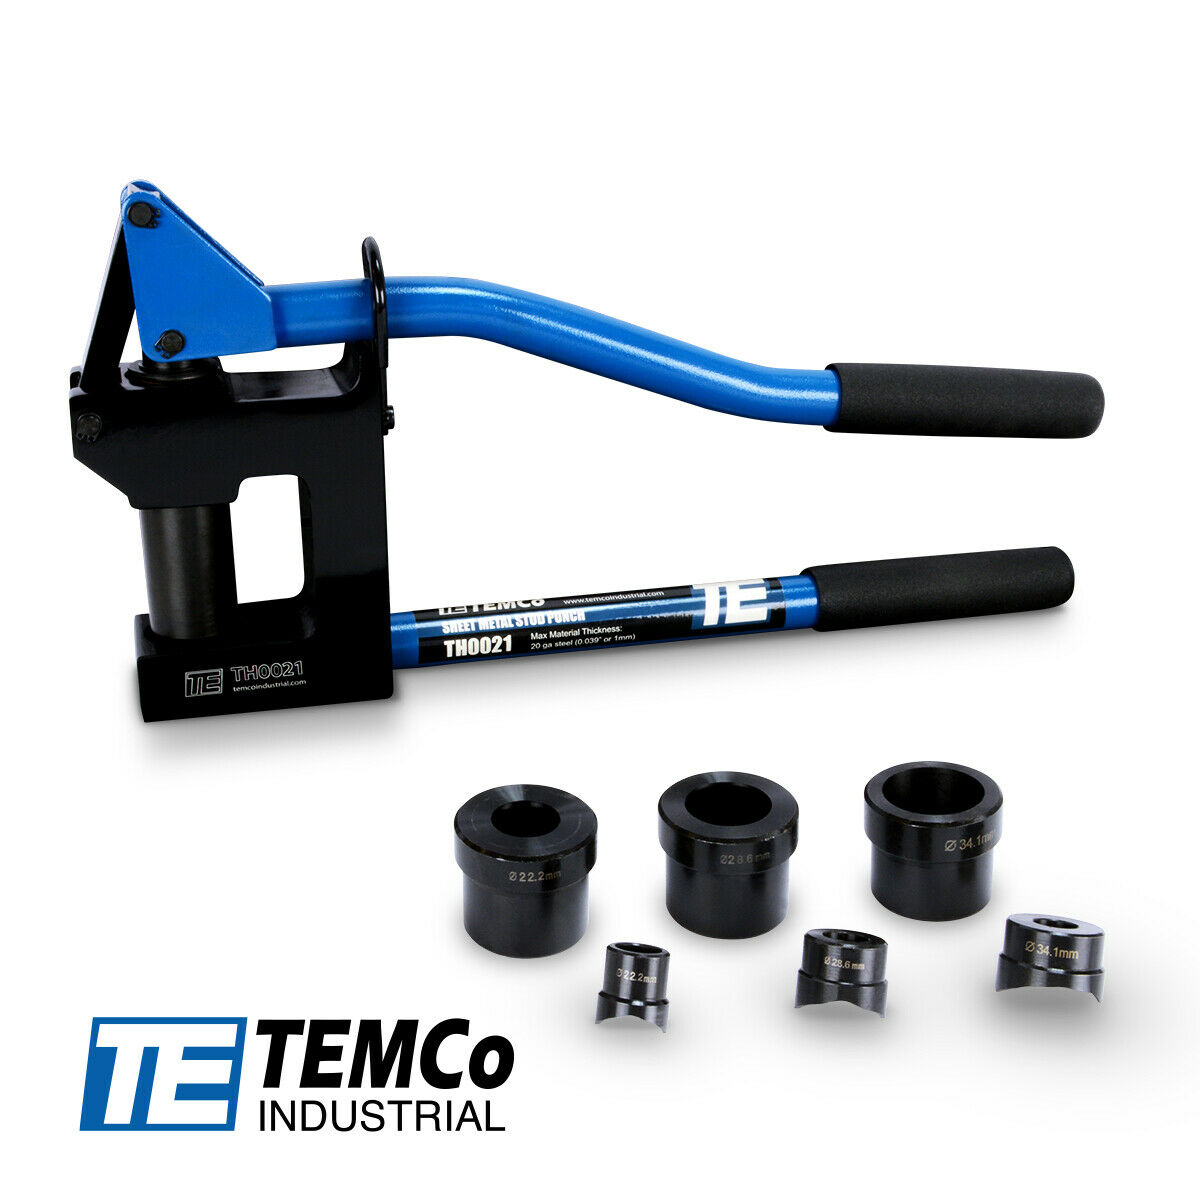 TEMCo Industrial TH0021 Manual Lever Sheet Metal Stud Punch 5 YEAR Warranty